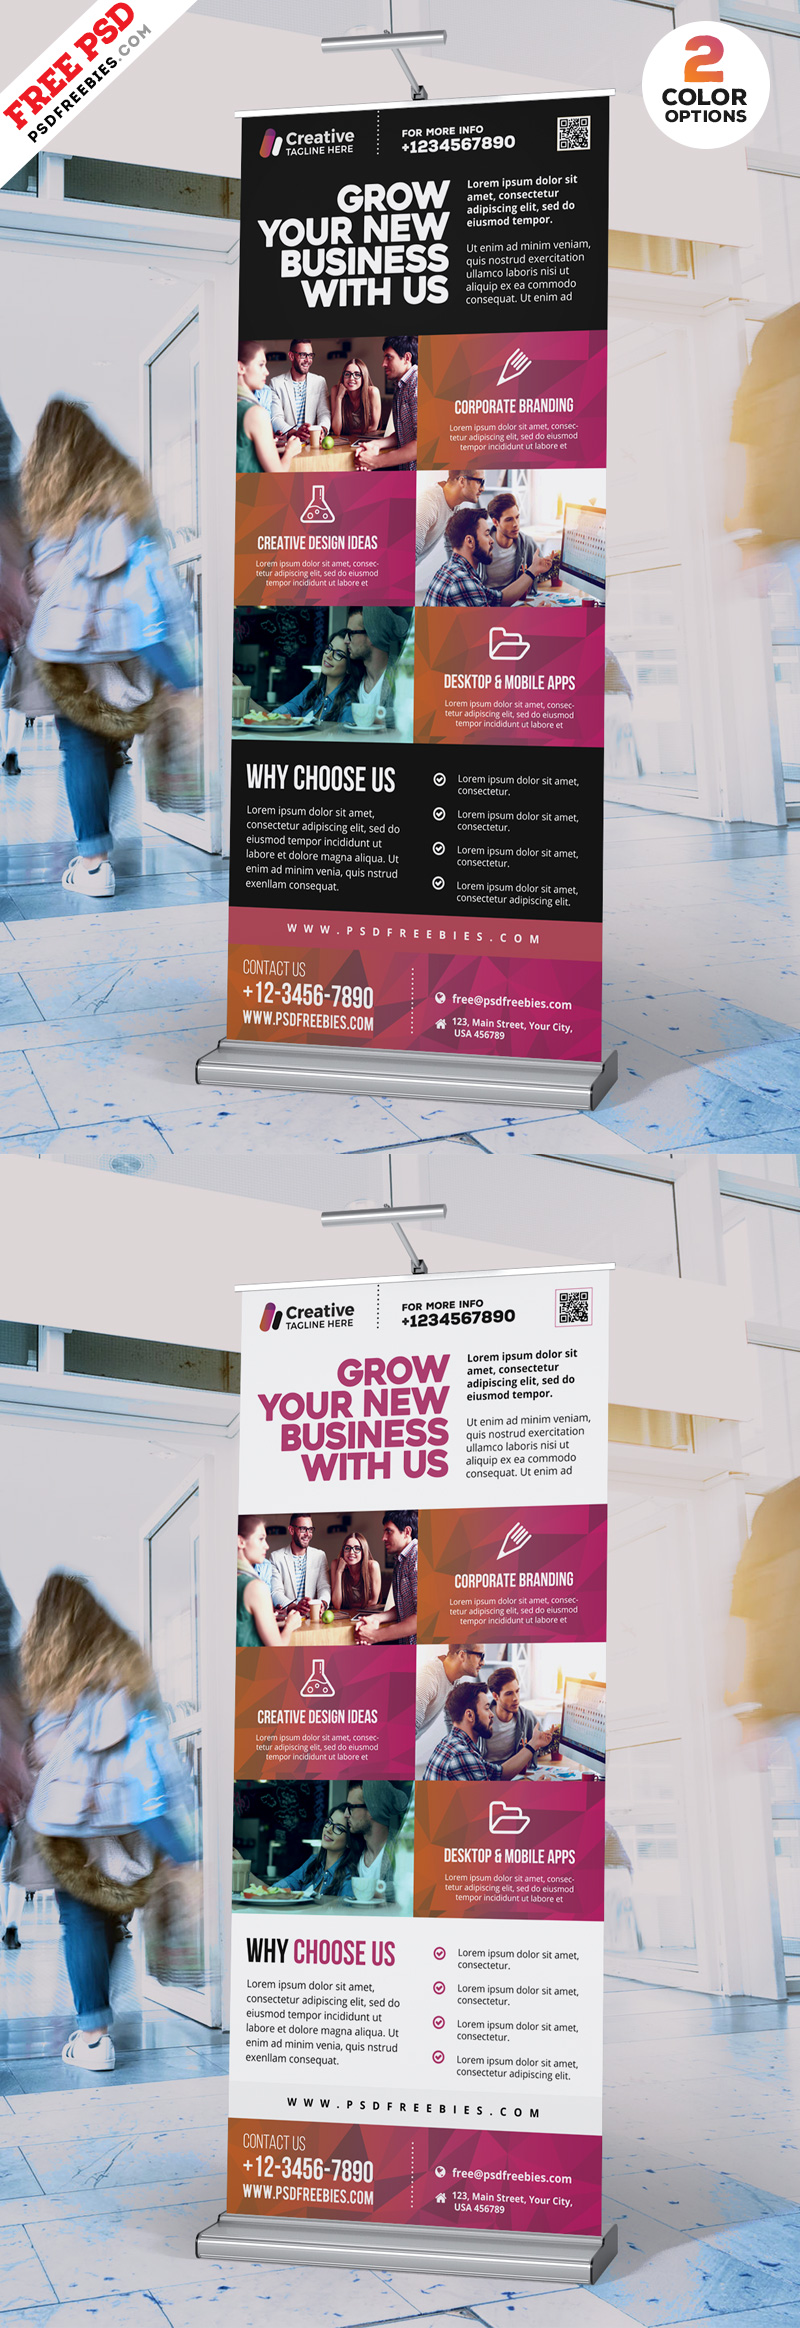 Rollup Banner Mockup set to showcase your Rollup Banner design in a photorealistic style. Simple edit with smart layers. Free for personal and commercial use. Enjoy!